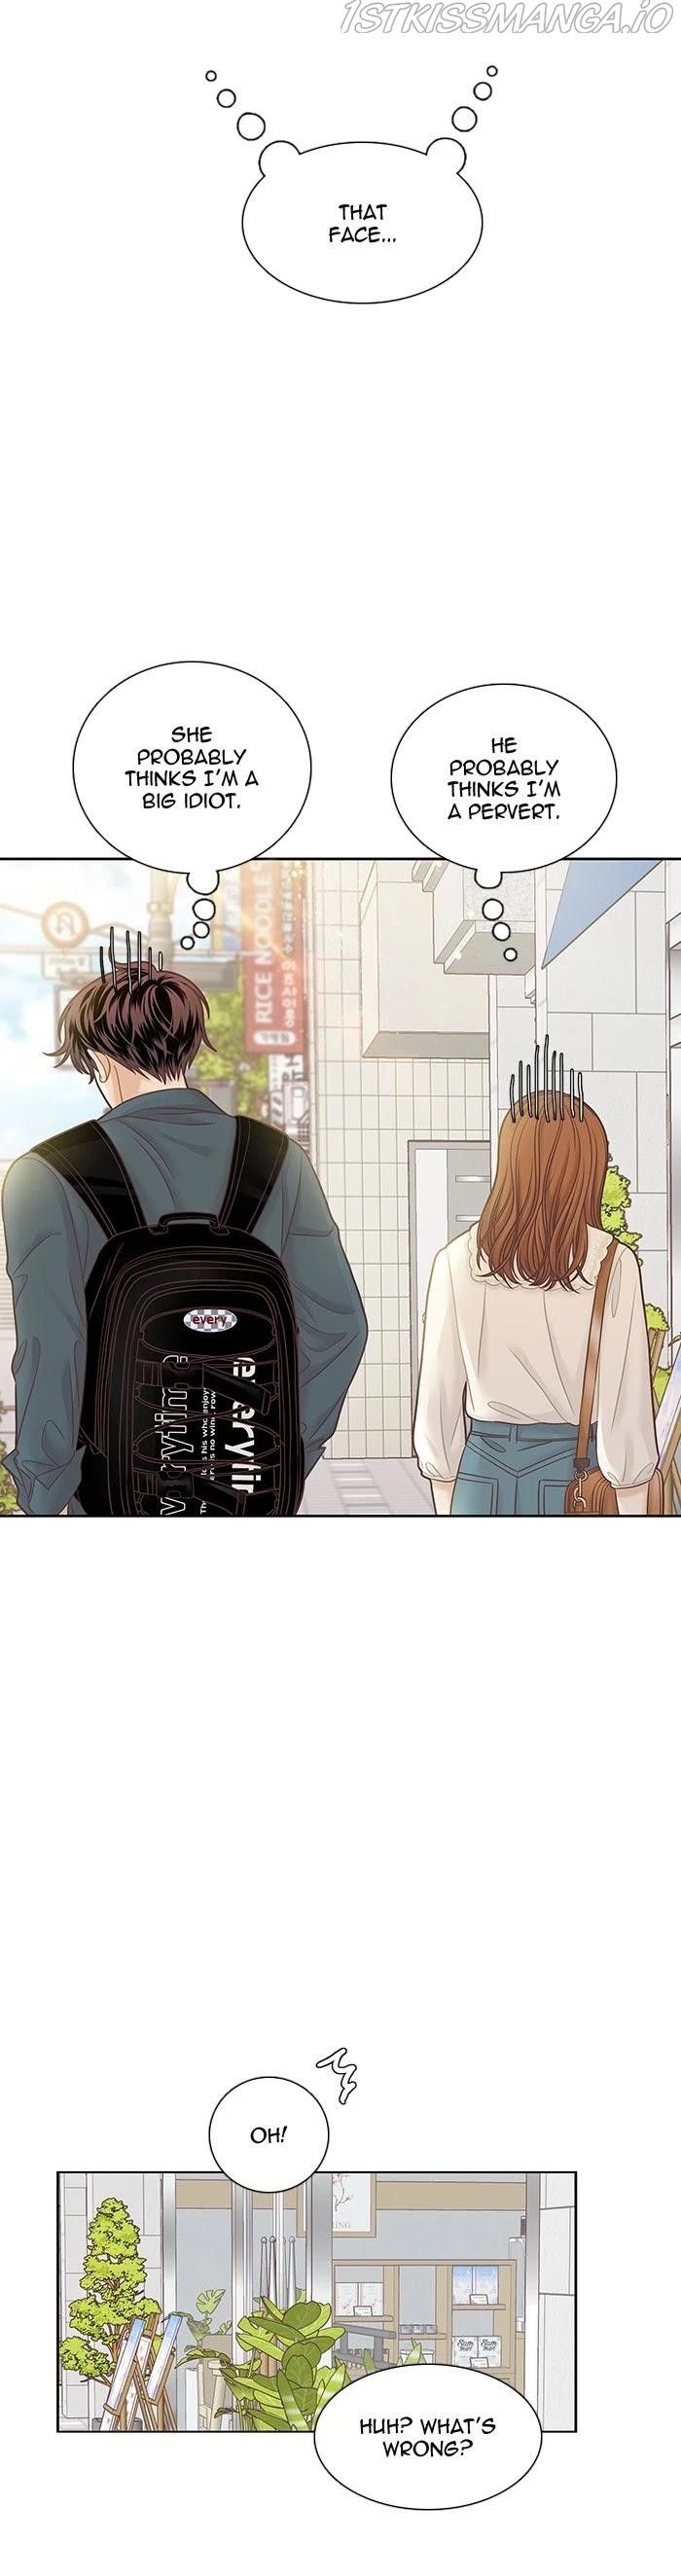 Girl’s World ( World of Girl ) Chapter 280 - Page 3